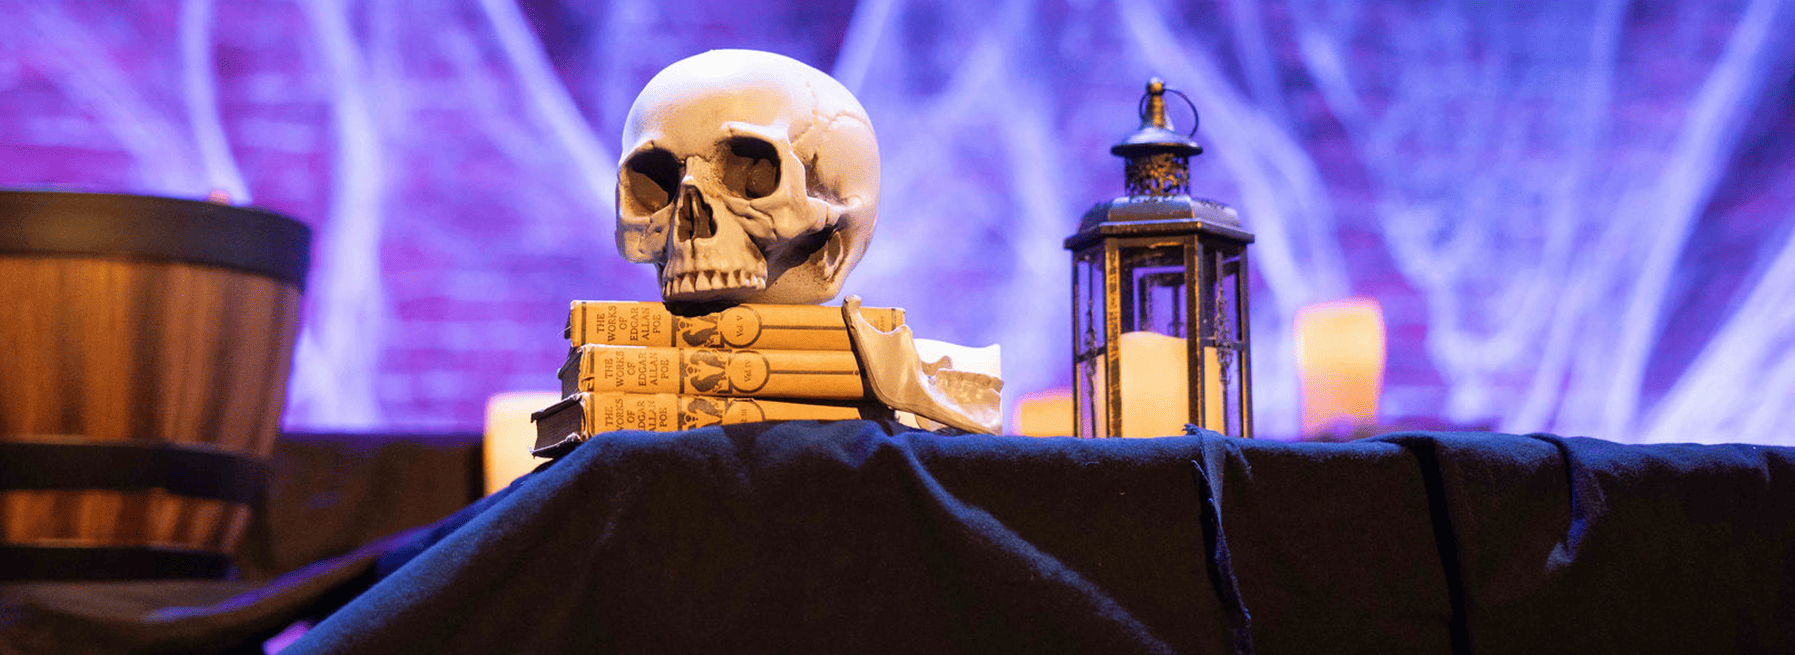 A skull prop sits atop three books next to a lantern. Spiderwebs adorn a brick wall in the background cast in purple-blue light